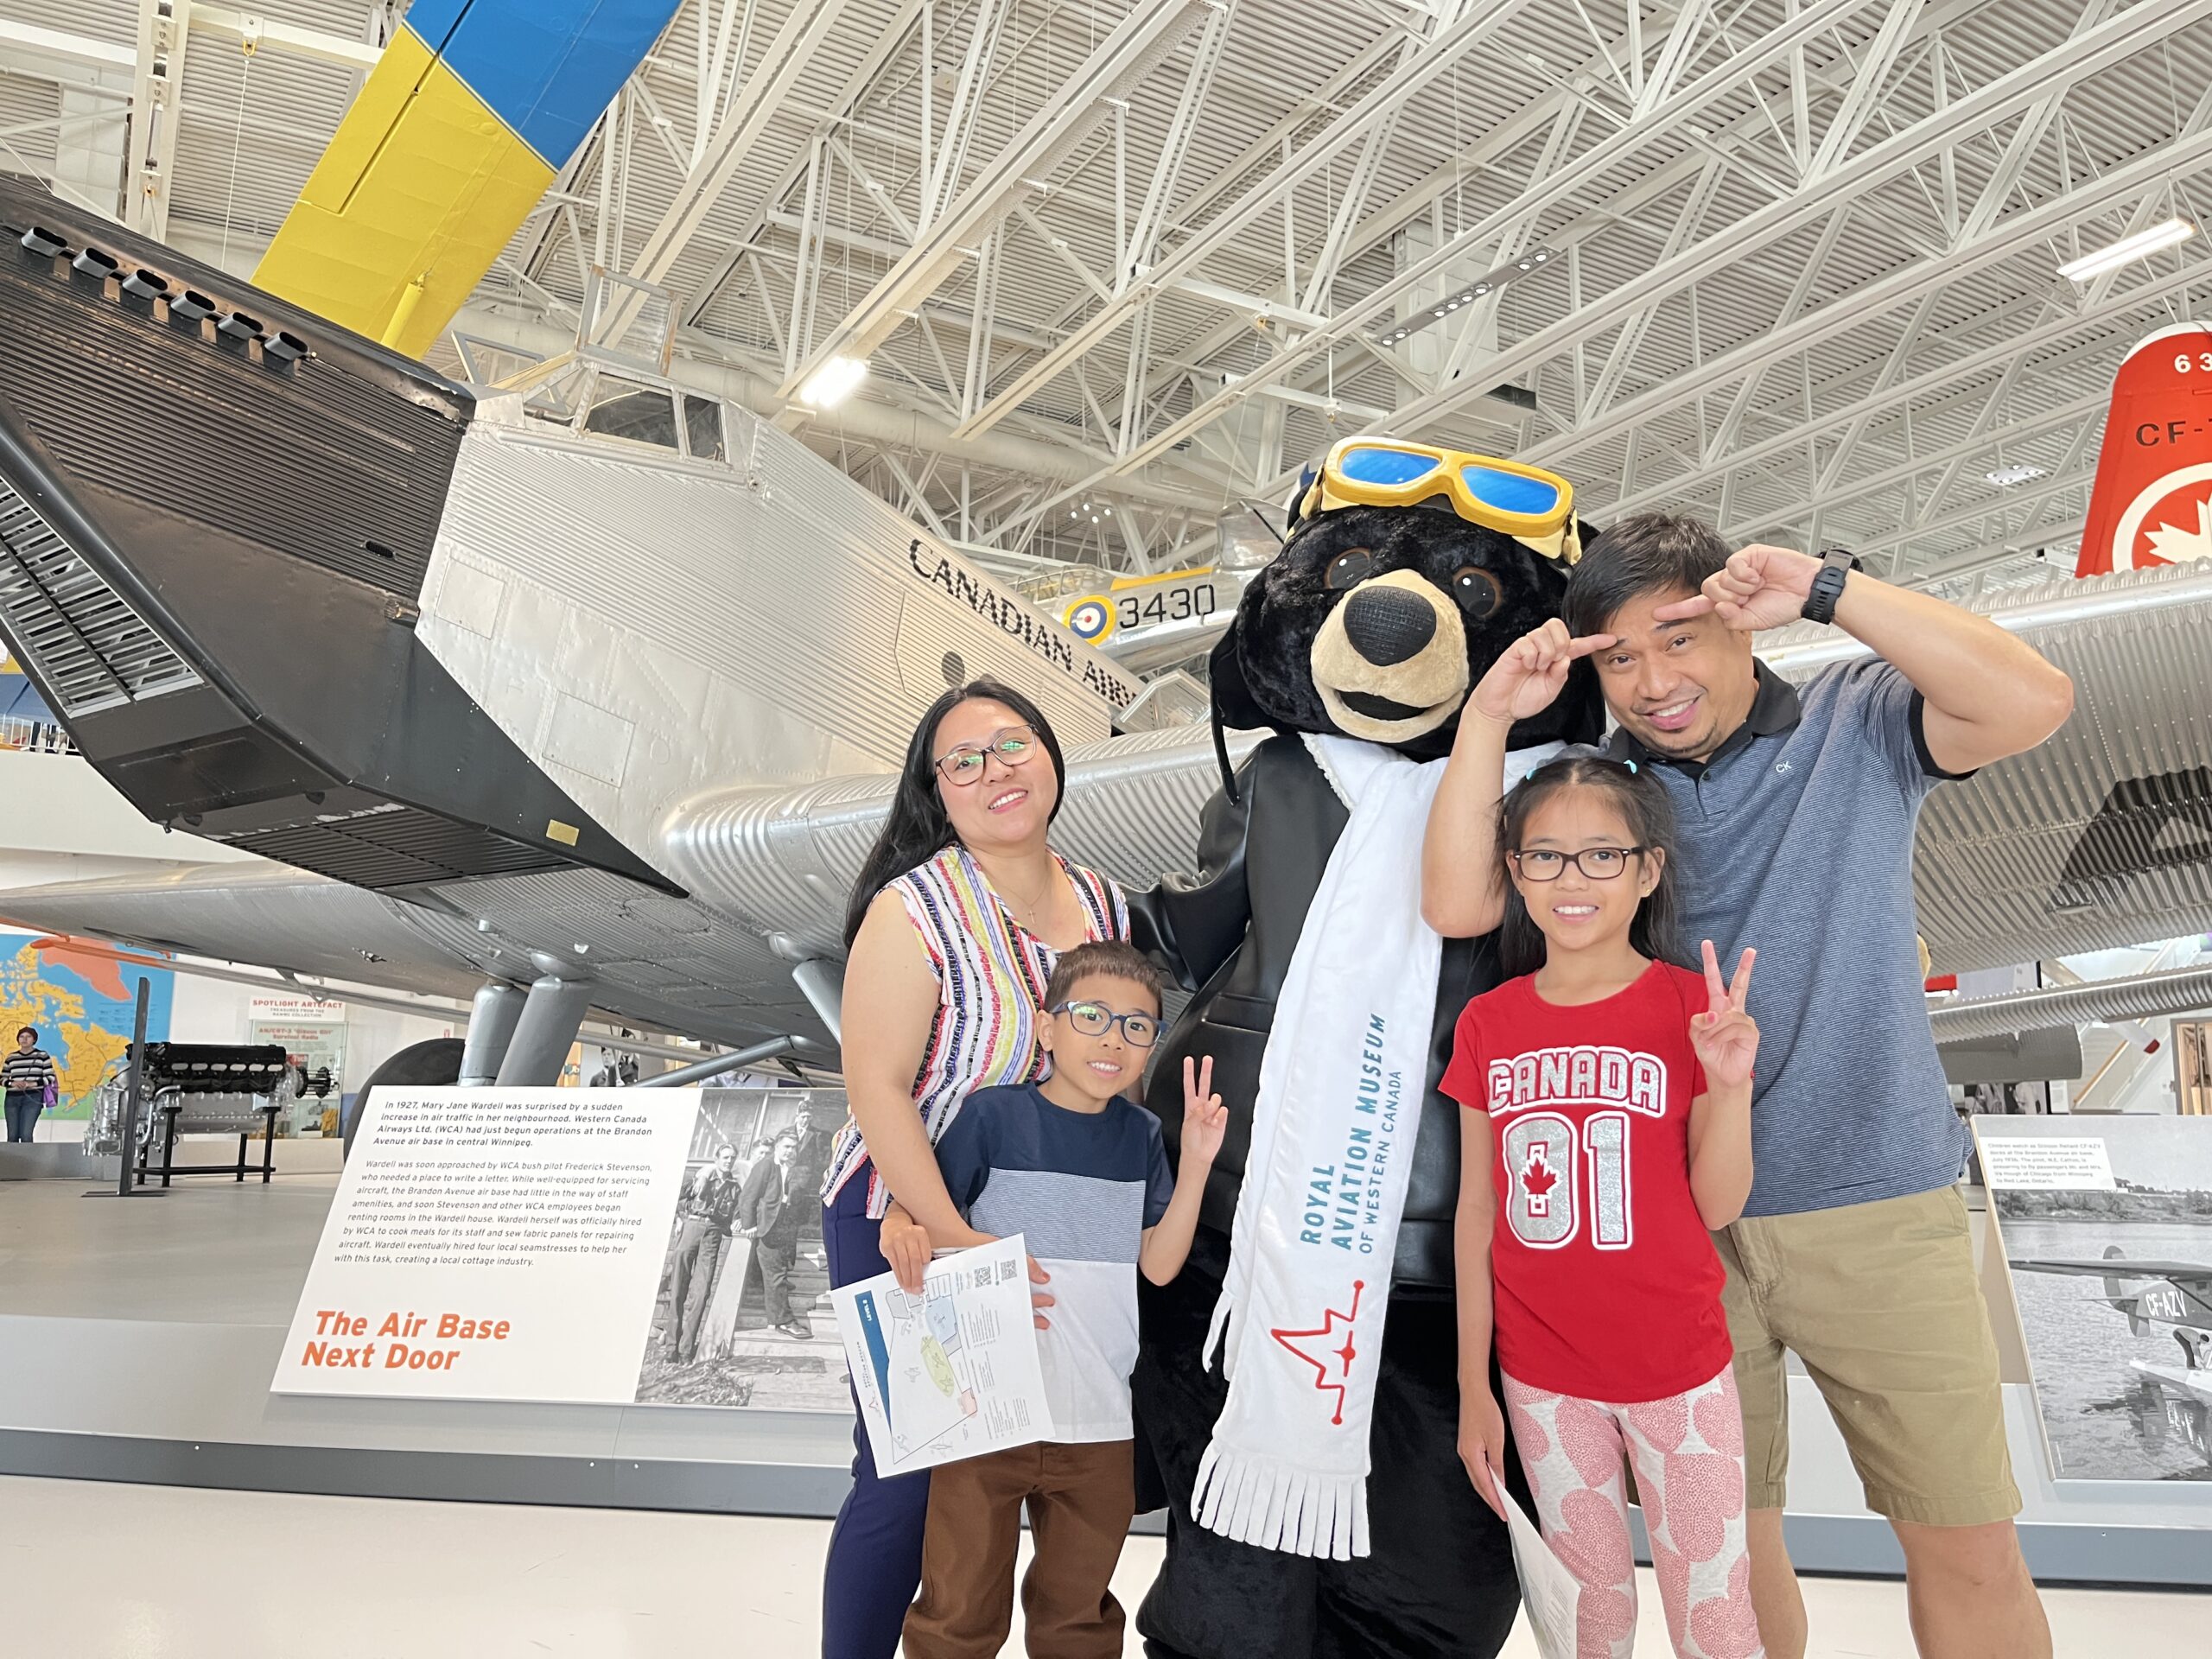 A family poses next to the Royal Aviation Museum's mascot at an event. Behind them is the museum's Junkers Ju52 aircrat.